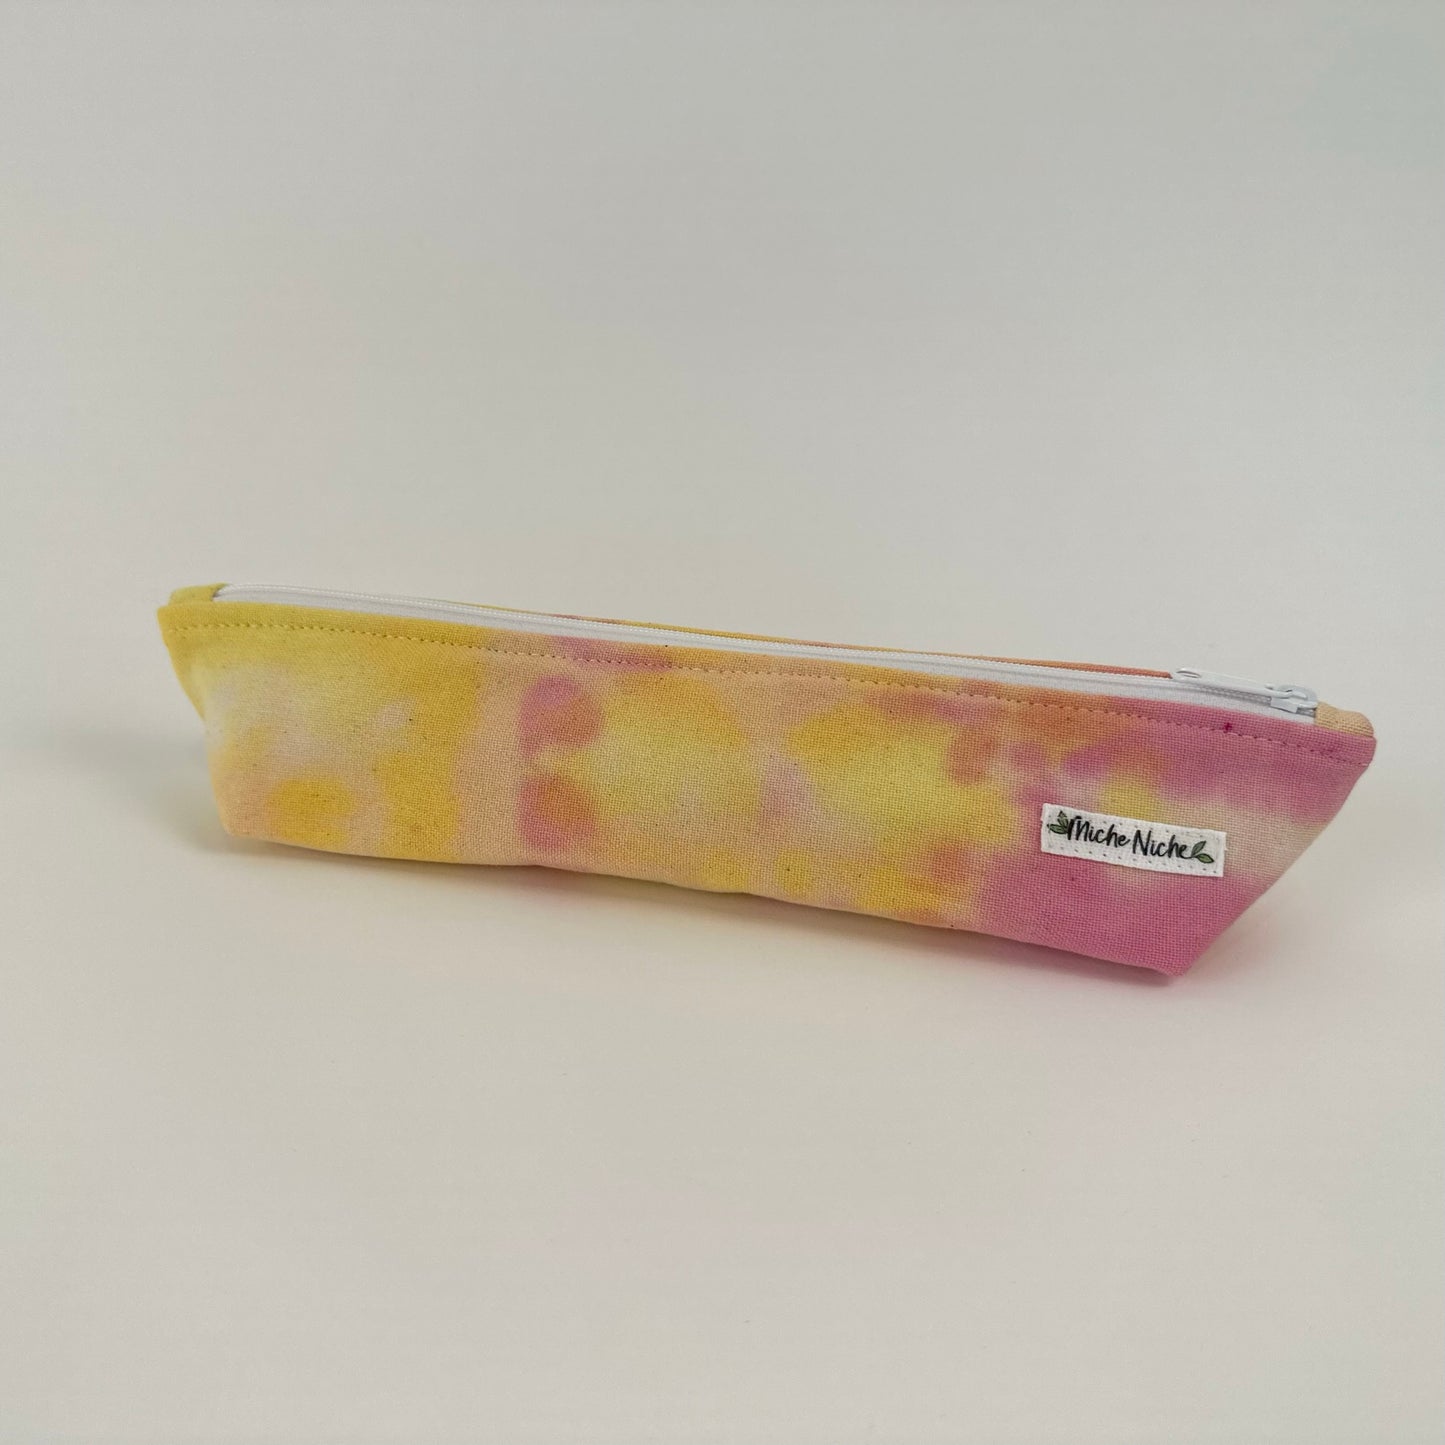 Miche Niche zipper pouch in a hand dyed pink and yellow tie dye pattern